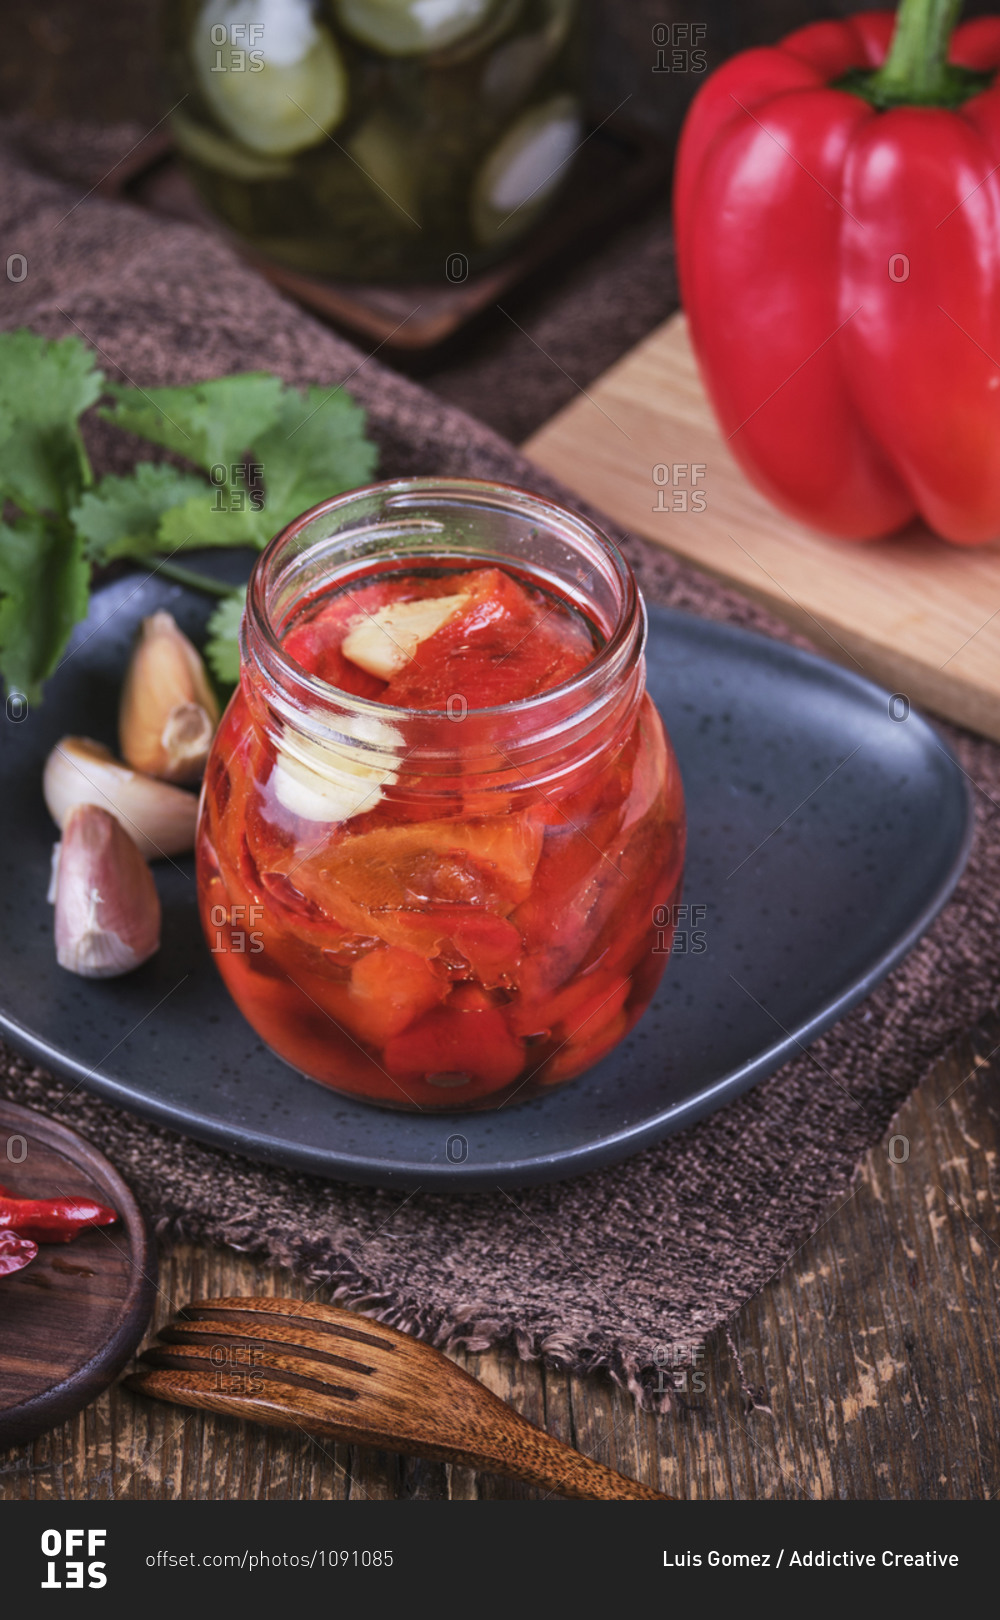 Vegan baked red peppers with garlic in crystal jar.